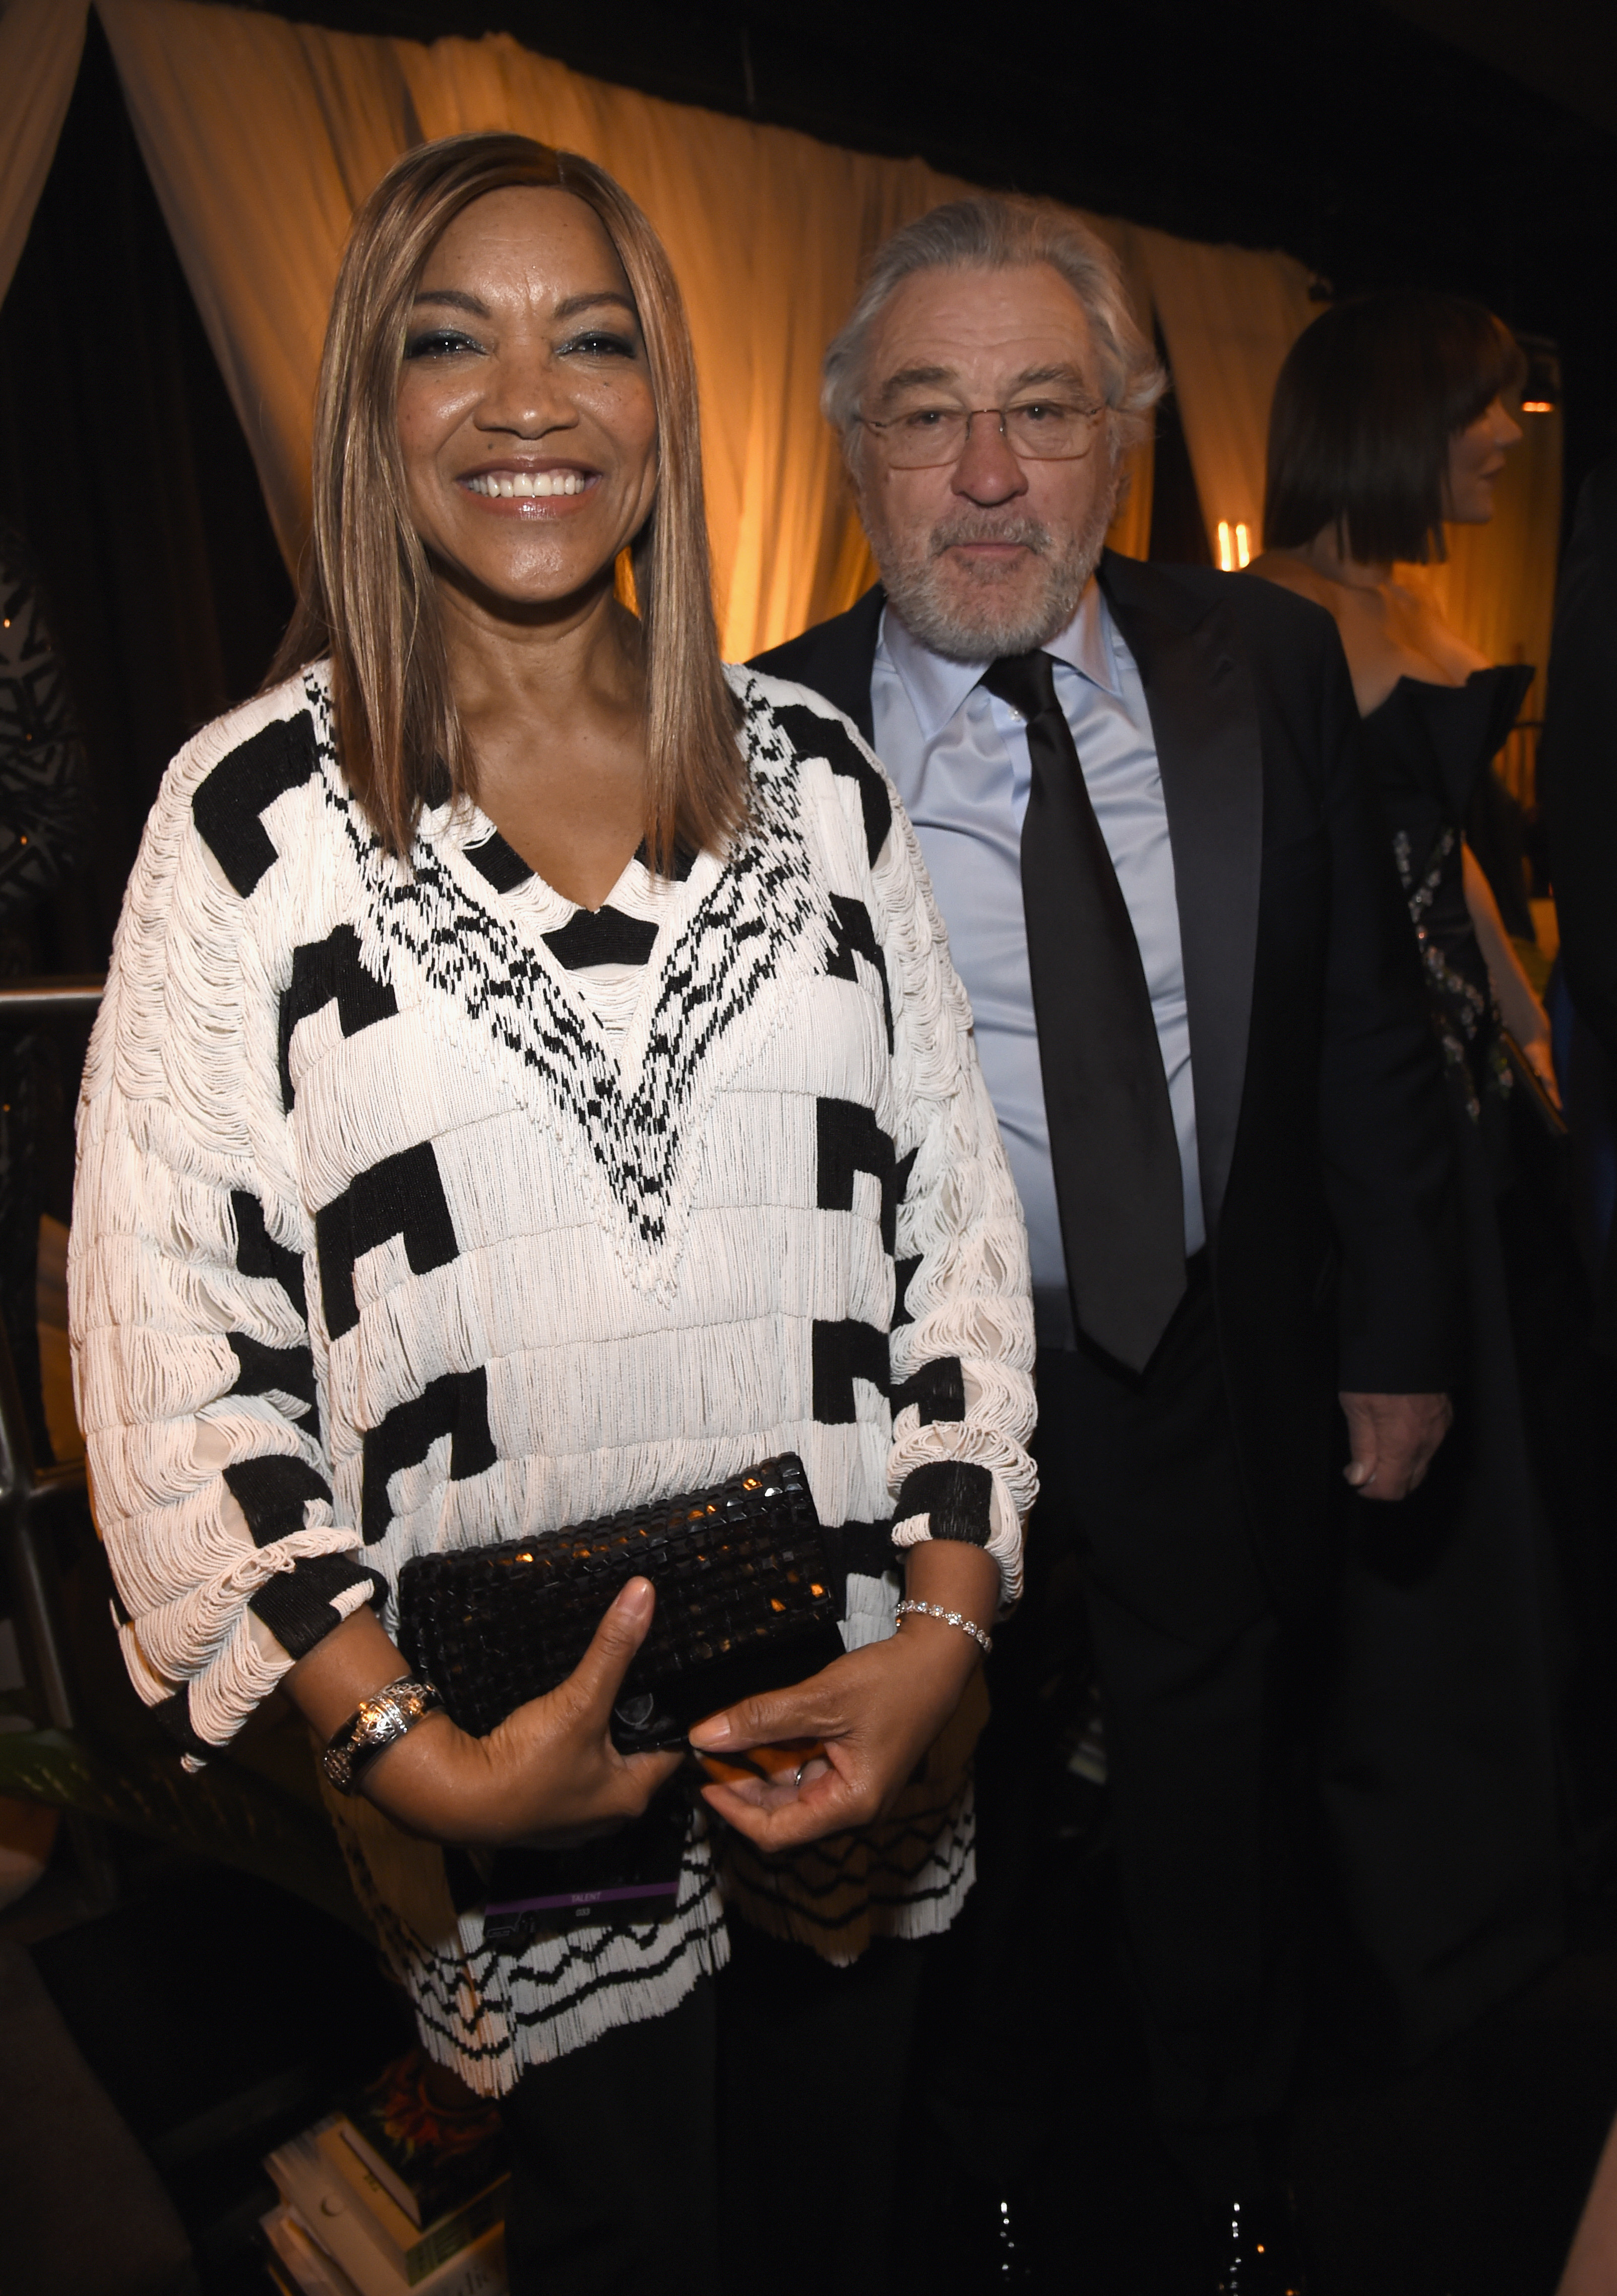 Grace Hightower and Robert De Niro at the 72nd Annual Tony Awards in 2018 in New York City. | Source: Getty Images